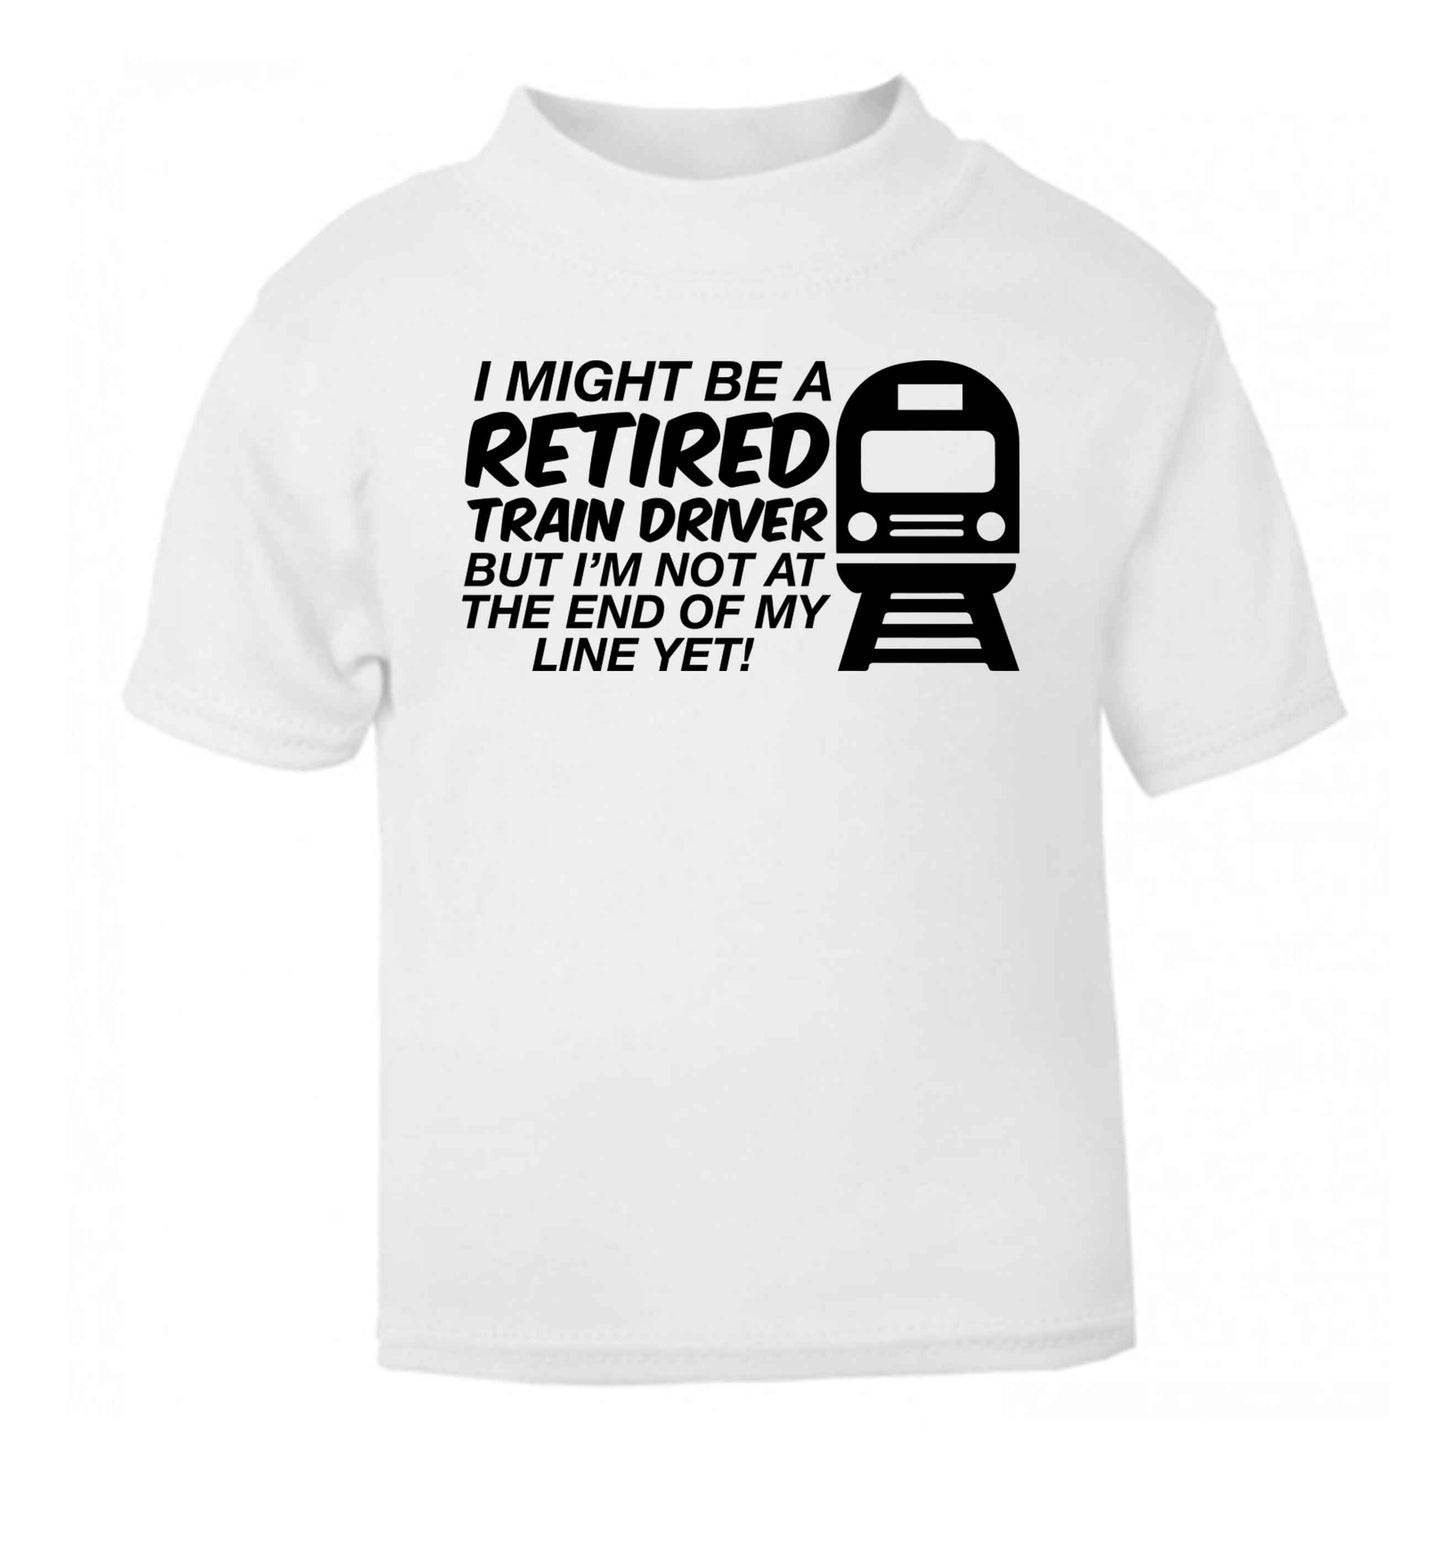 Retired train driver but I'm not at the end of my line yet white Baby Toddler Tshirt 2 Years